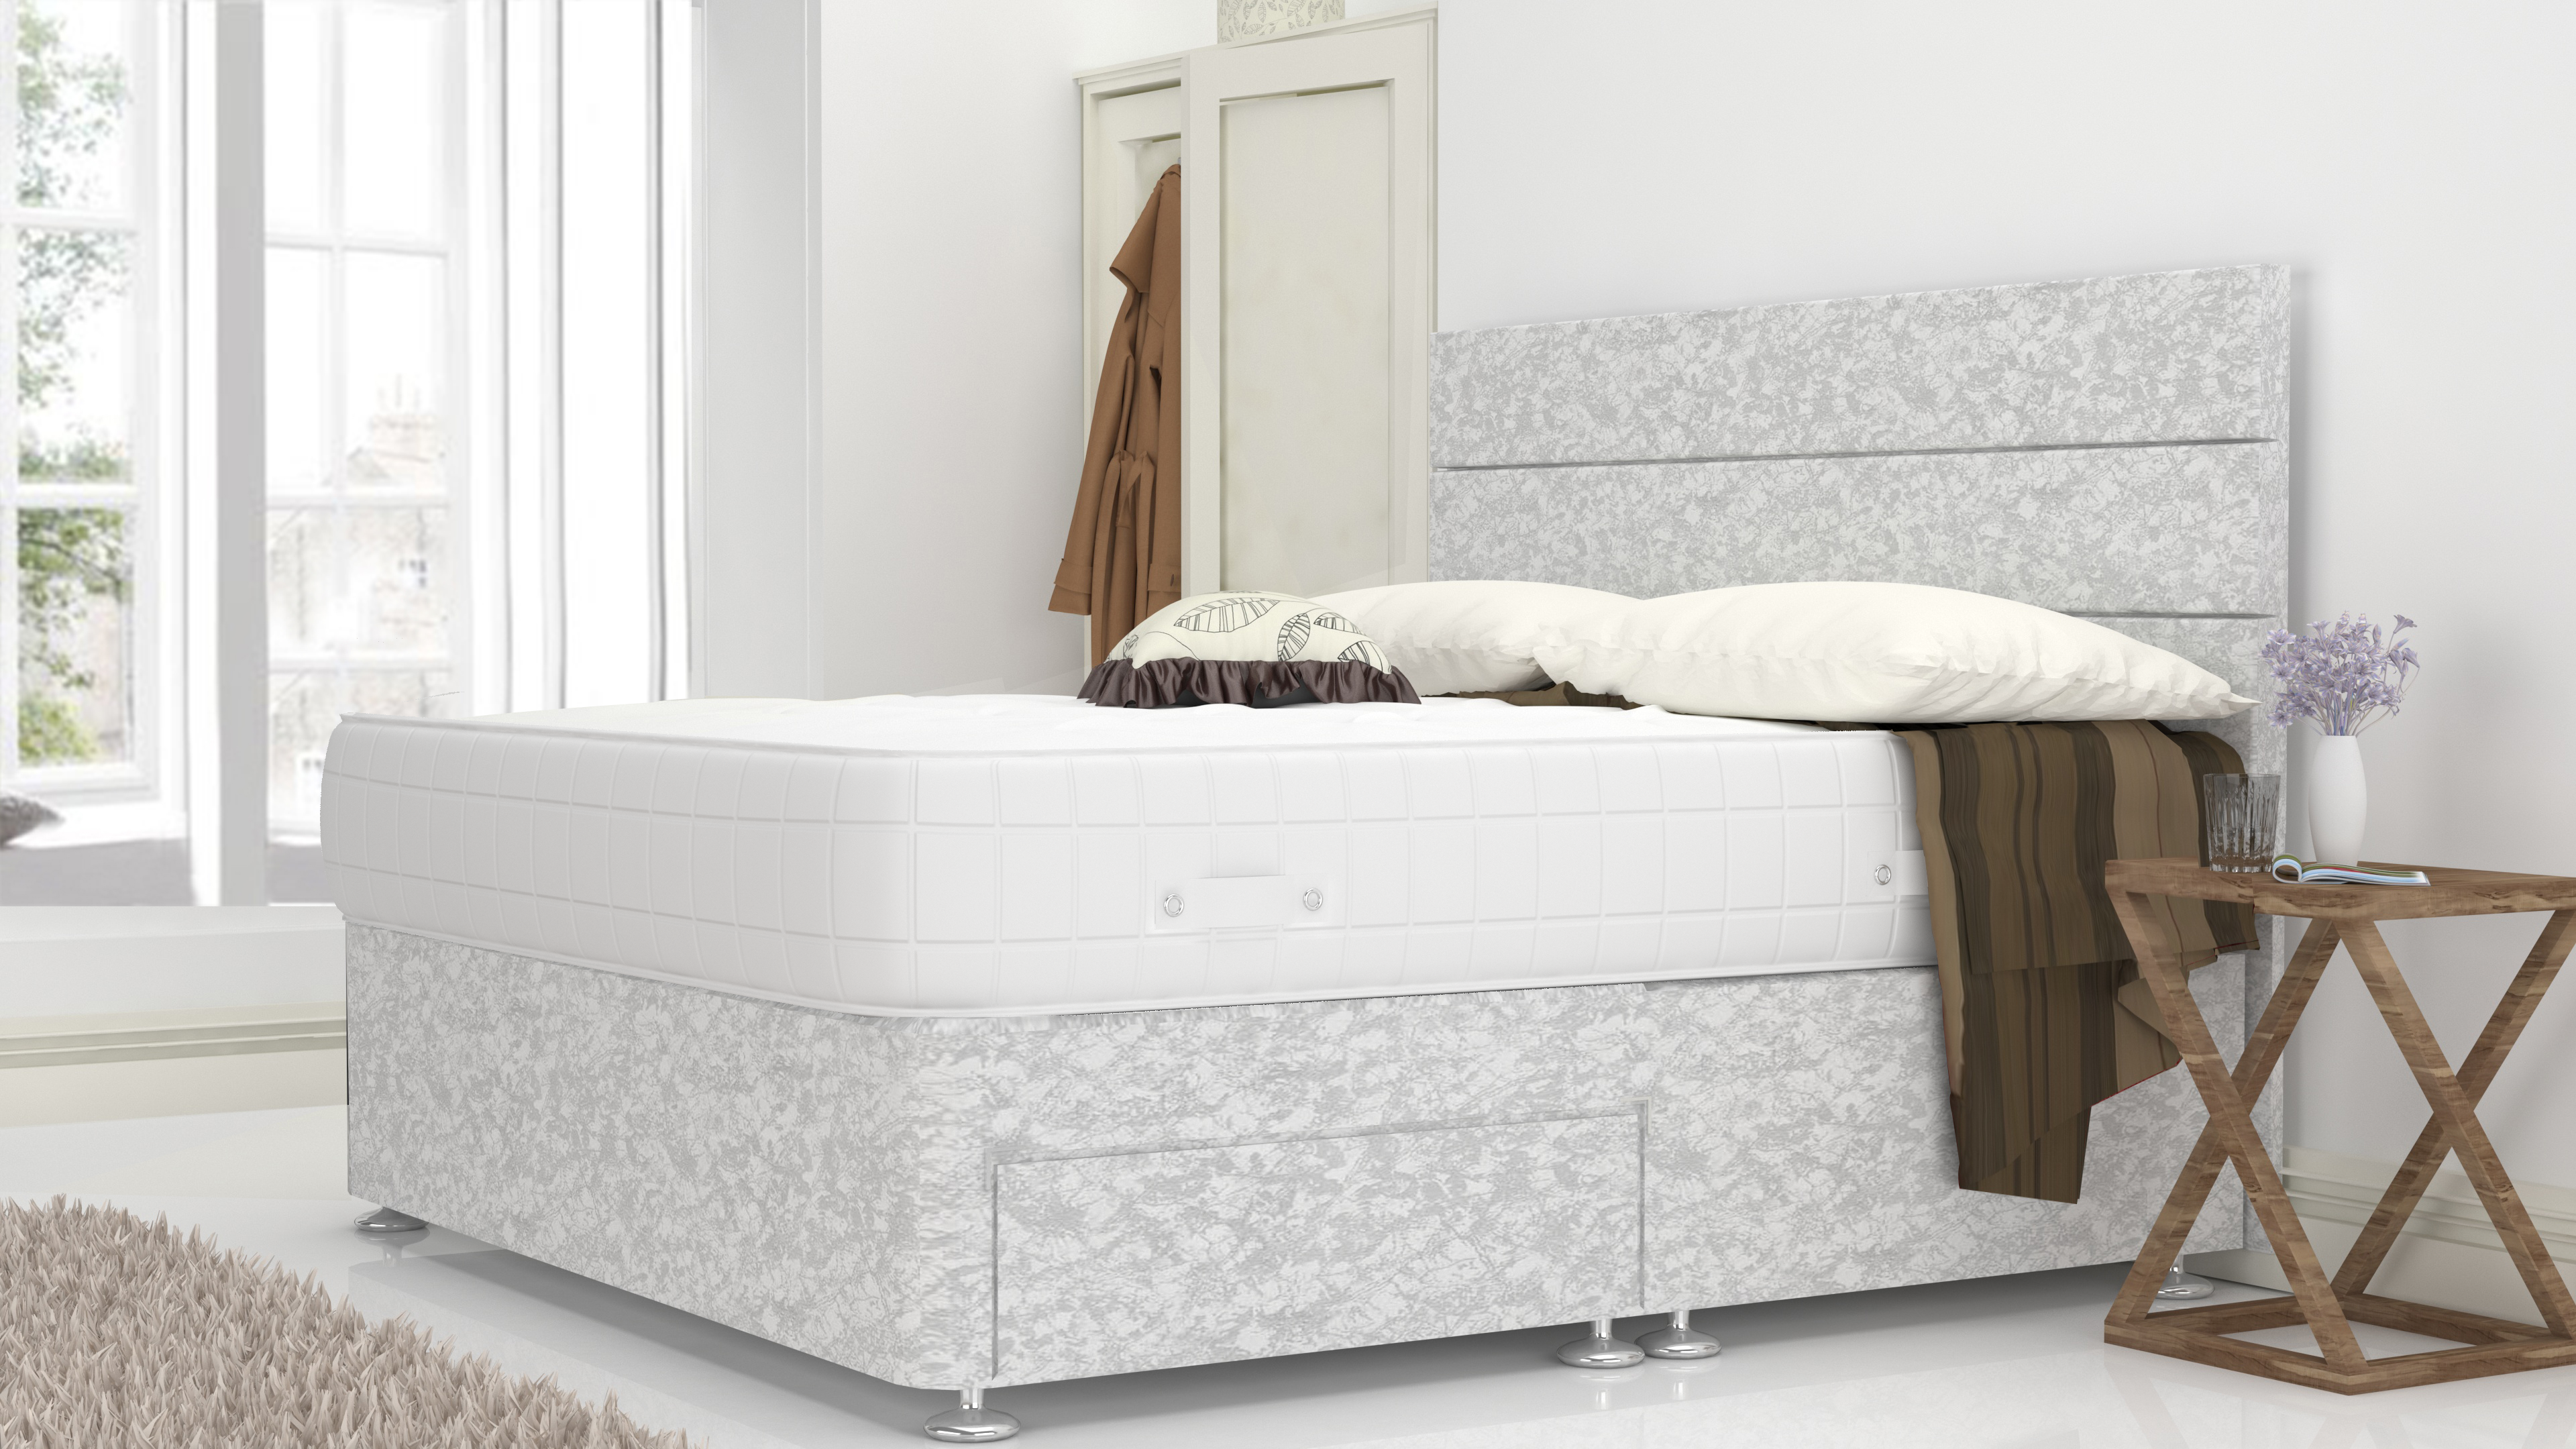 White Crushed Velvet 6 Feet Divan Bed With 3 Panel Headboard (Included Feet) And Free Pillow Top Mattress